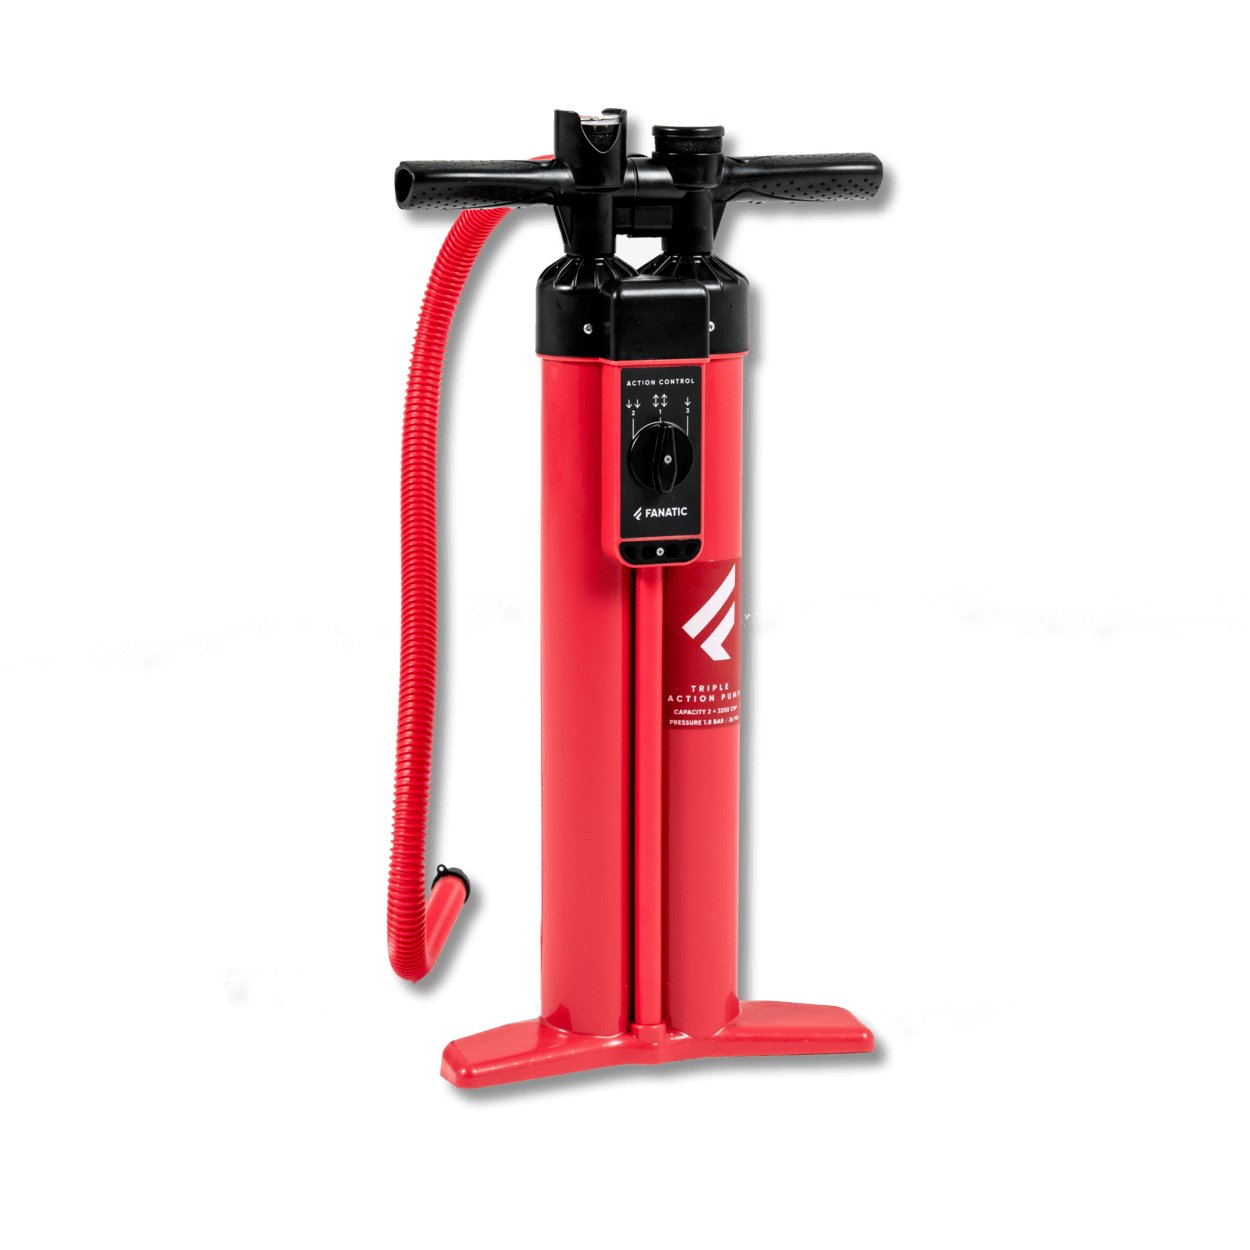 Fanatic Pump Triple Action HP6 2023 - Worthing Watersports - 9008415929757 - Accessories - Fanatic SUP